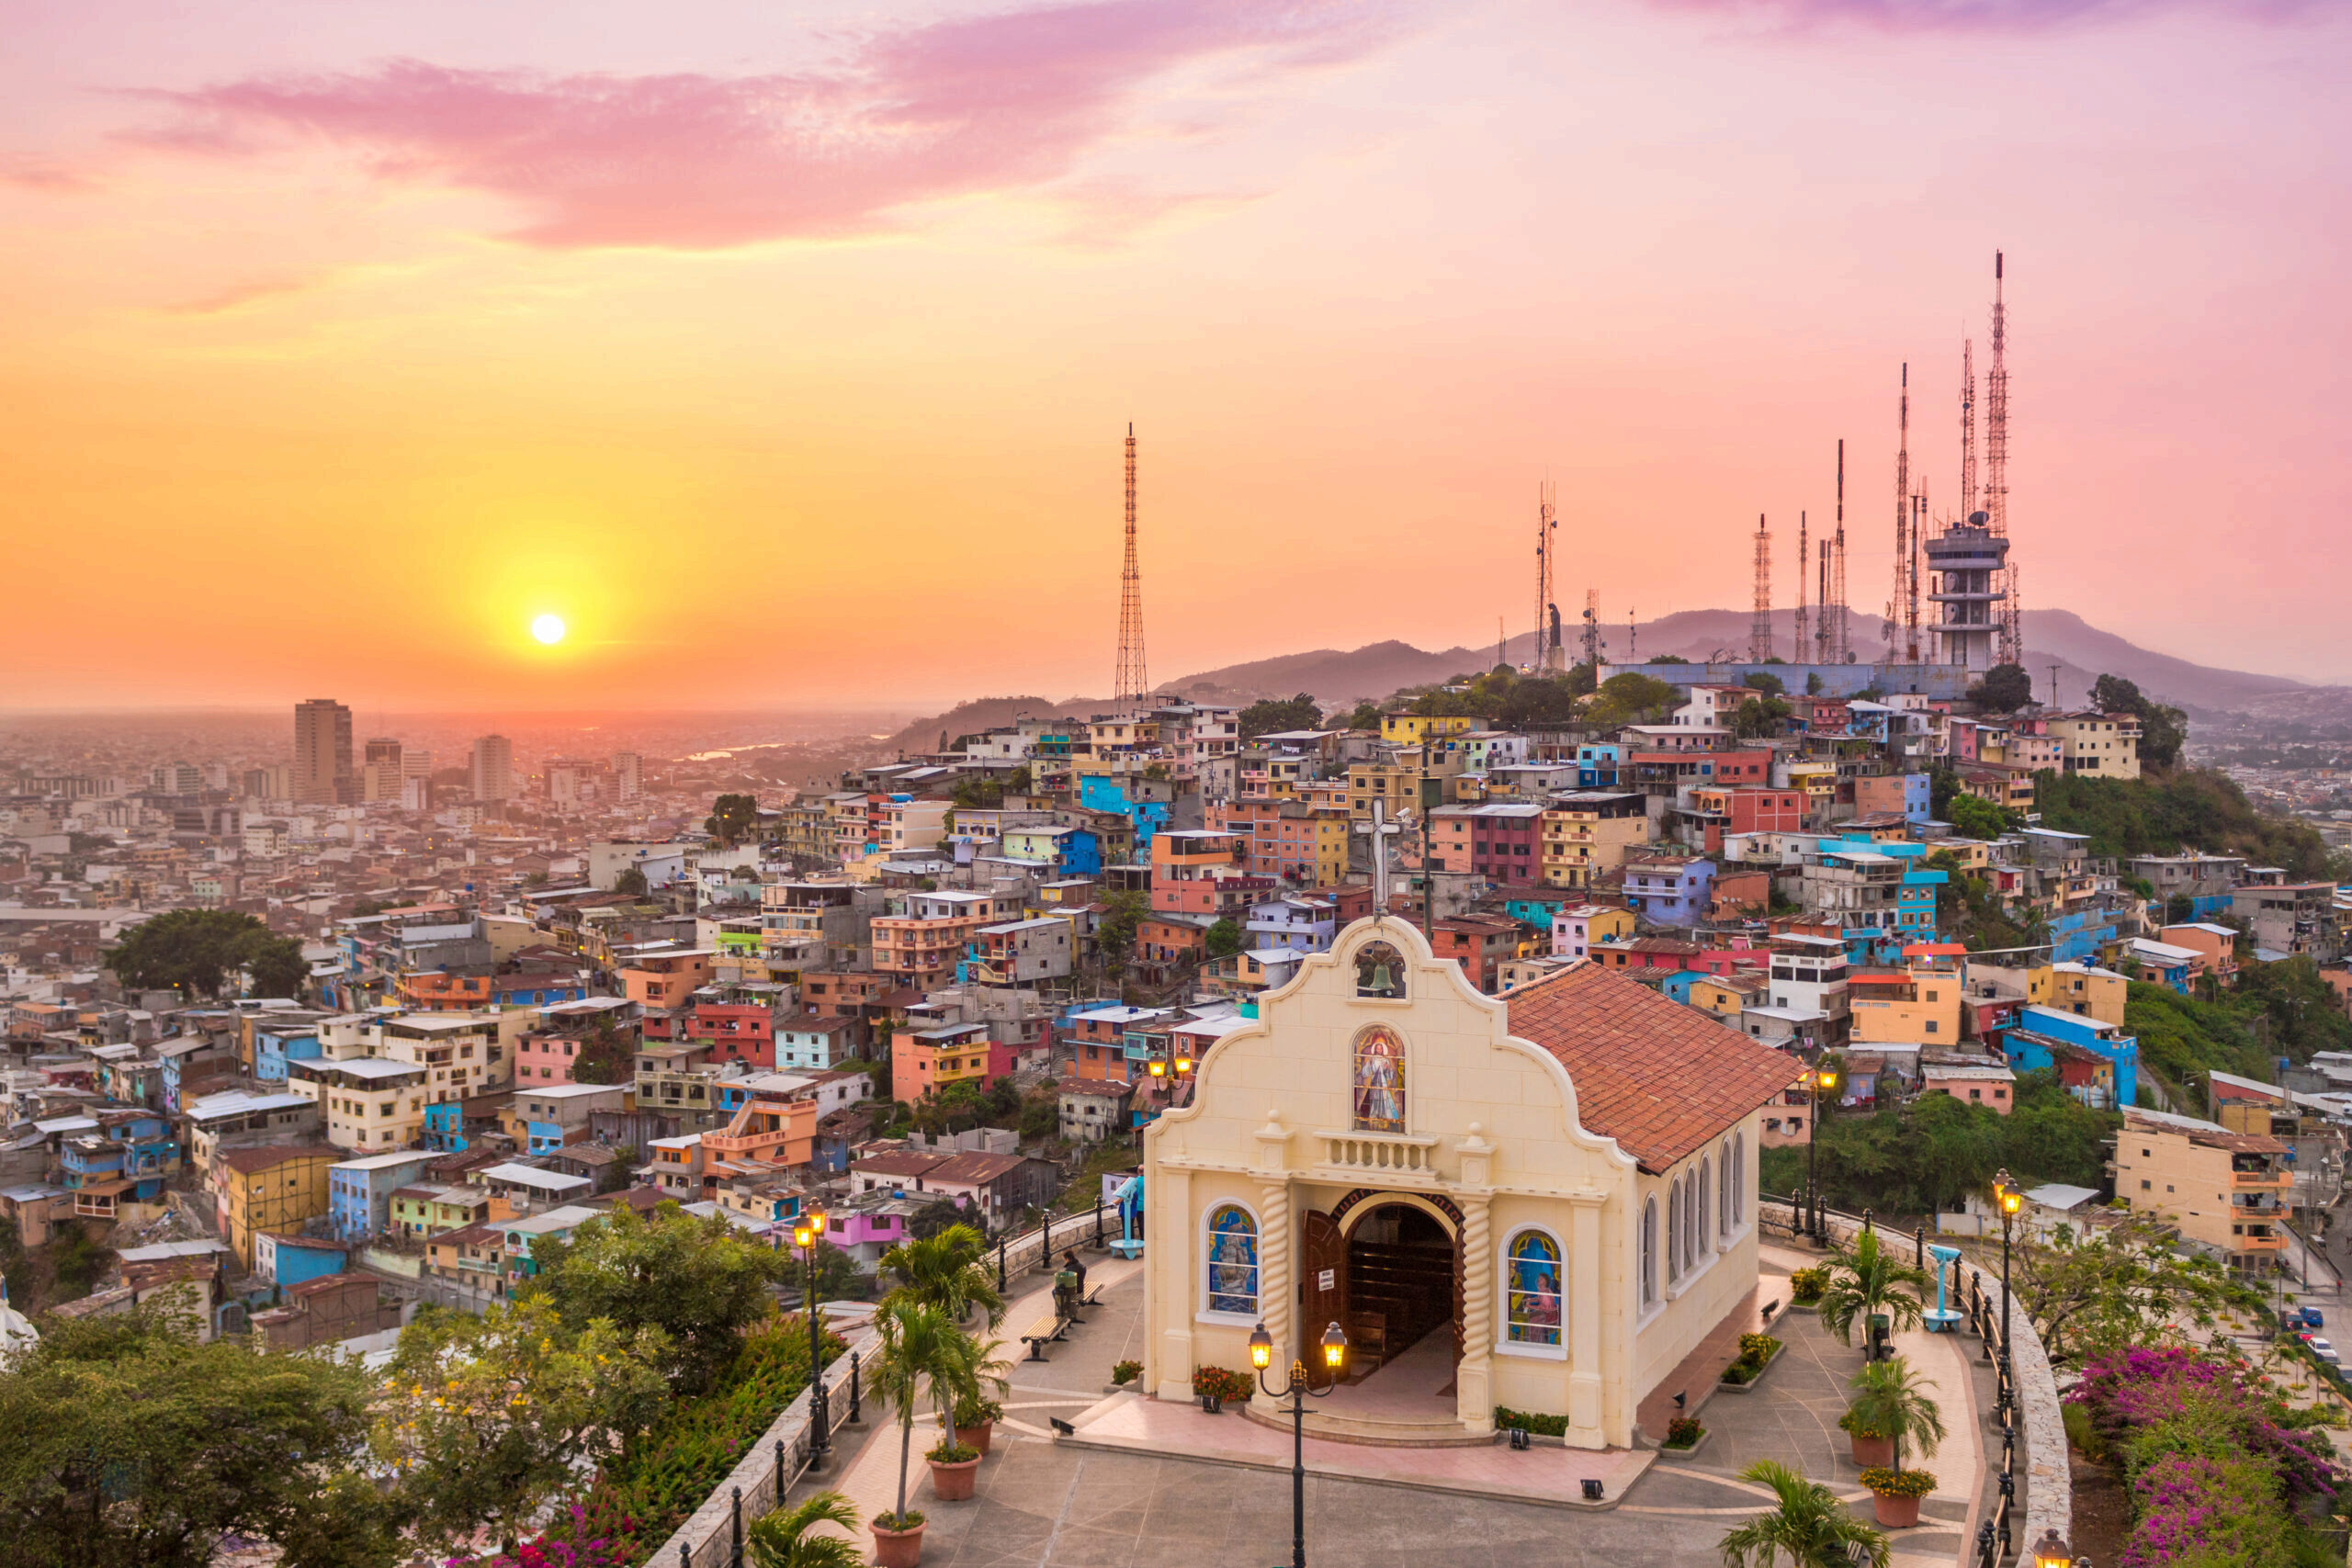 Decorative image of Sunset In The City Of Guayaquil with an old church in the foreground and colorful homes on a hill in the background